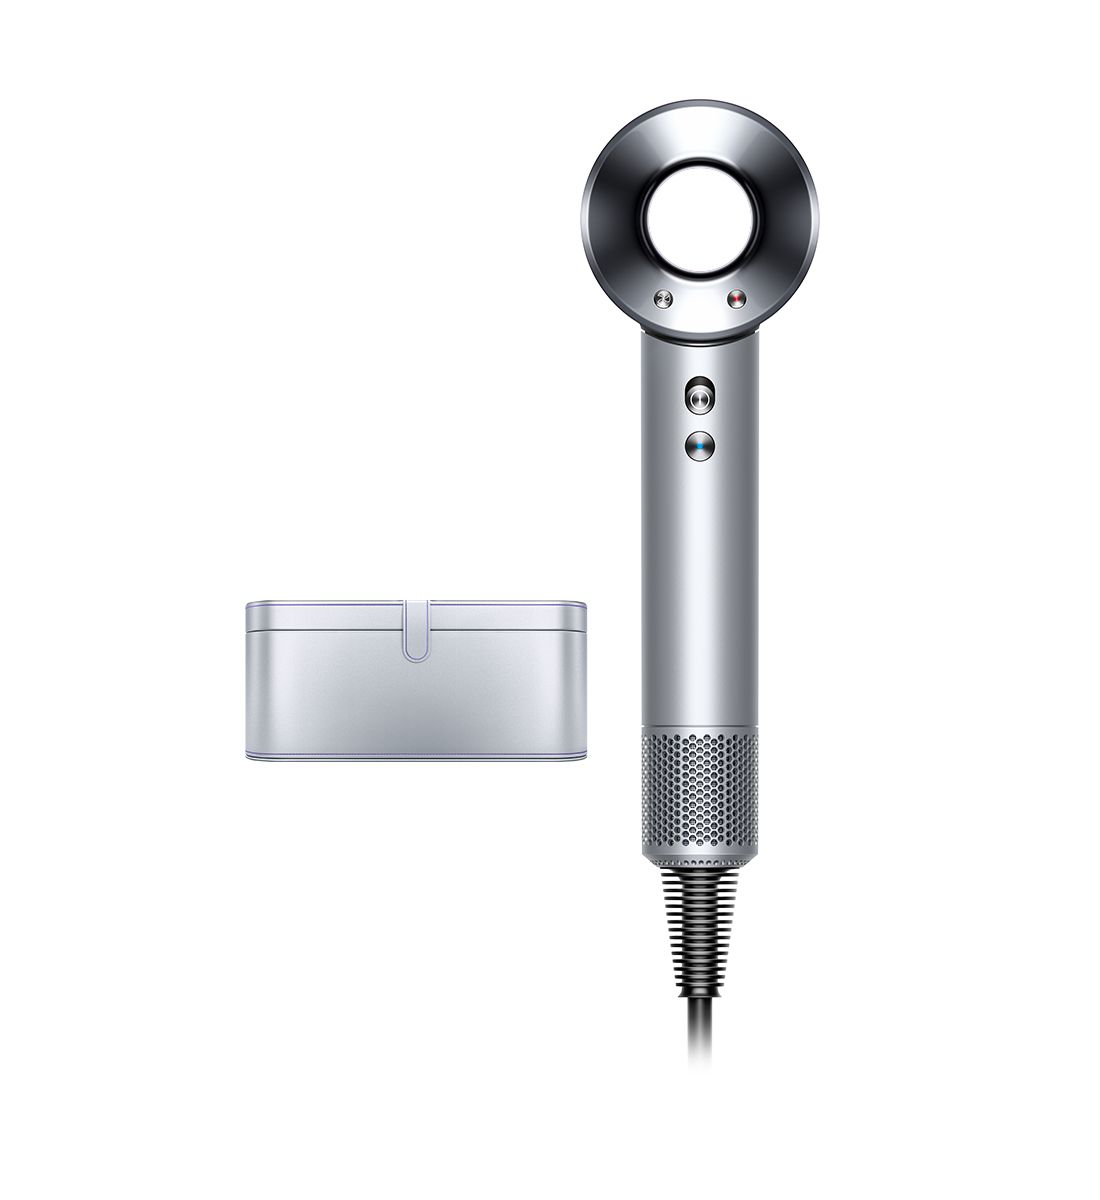 Dyson Supersonic™ hair dryer in white/silver